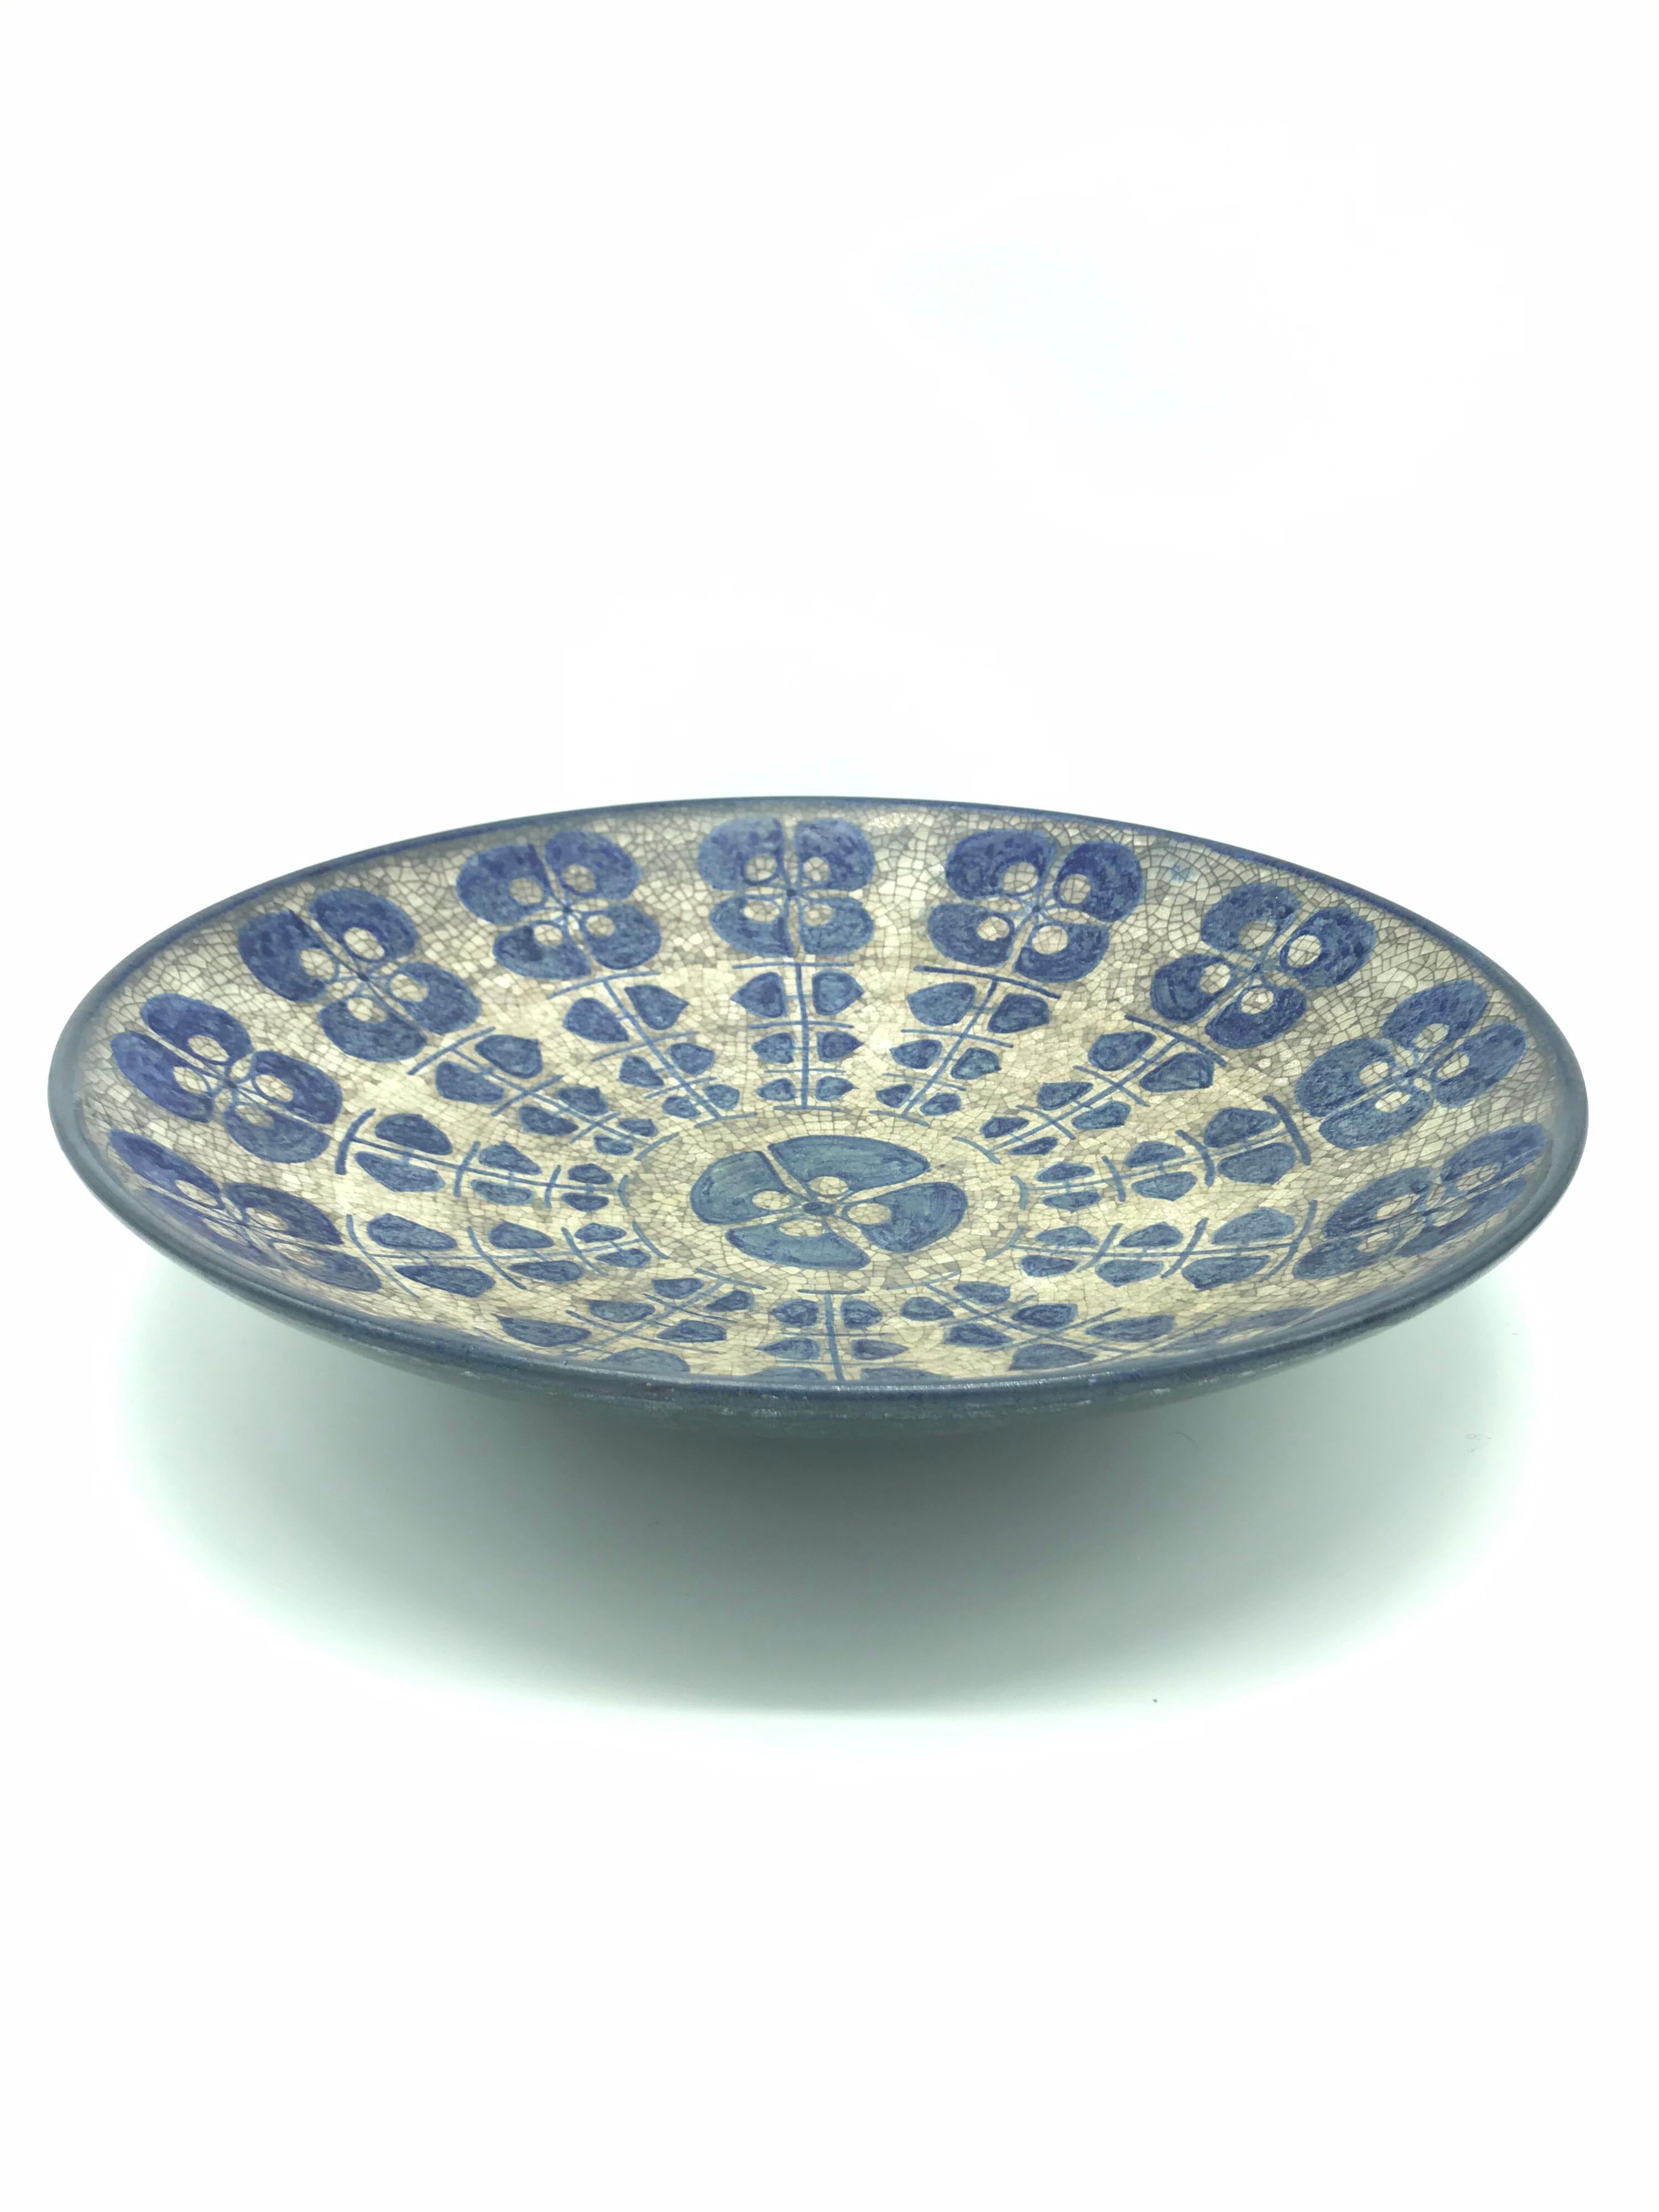 Large and beautiful pottery bowl designed by Marianne Starck for Michael Andersen Of Bornholm in the 1960s
Born: 1938 - Died: 2007
Marianne Starck was one of the main contributors to the success of Michael Andersen & Søn’s pottery in the second